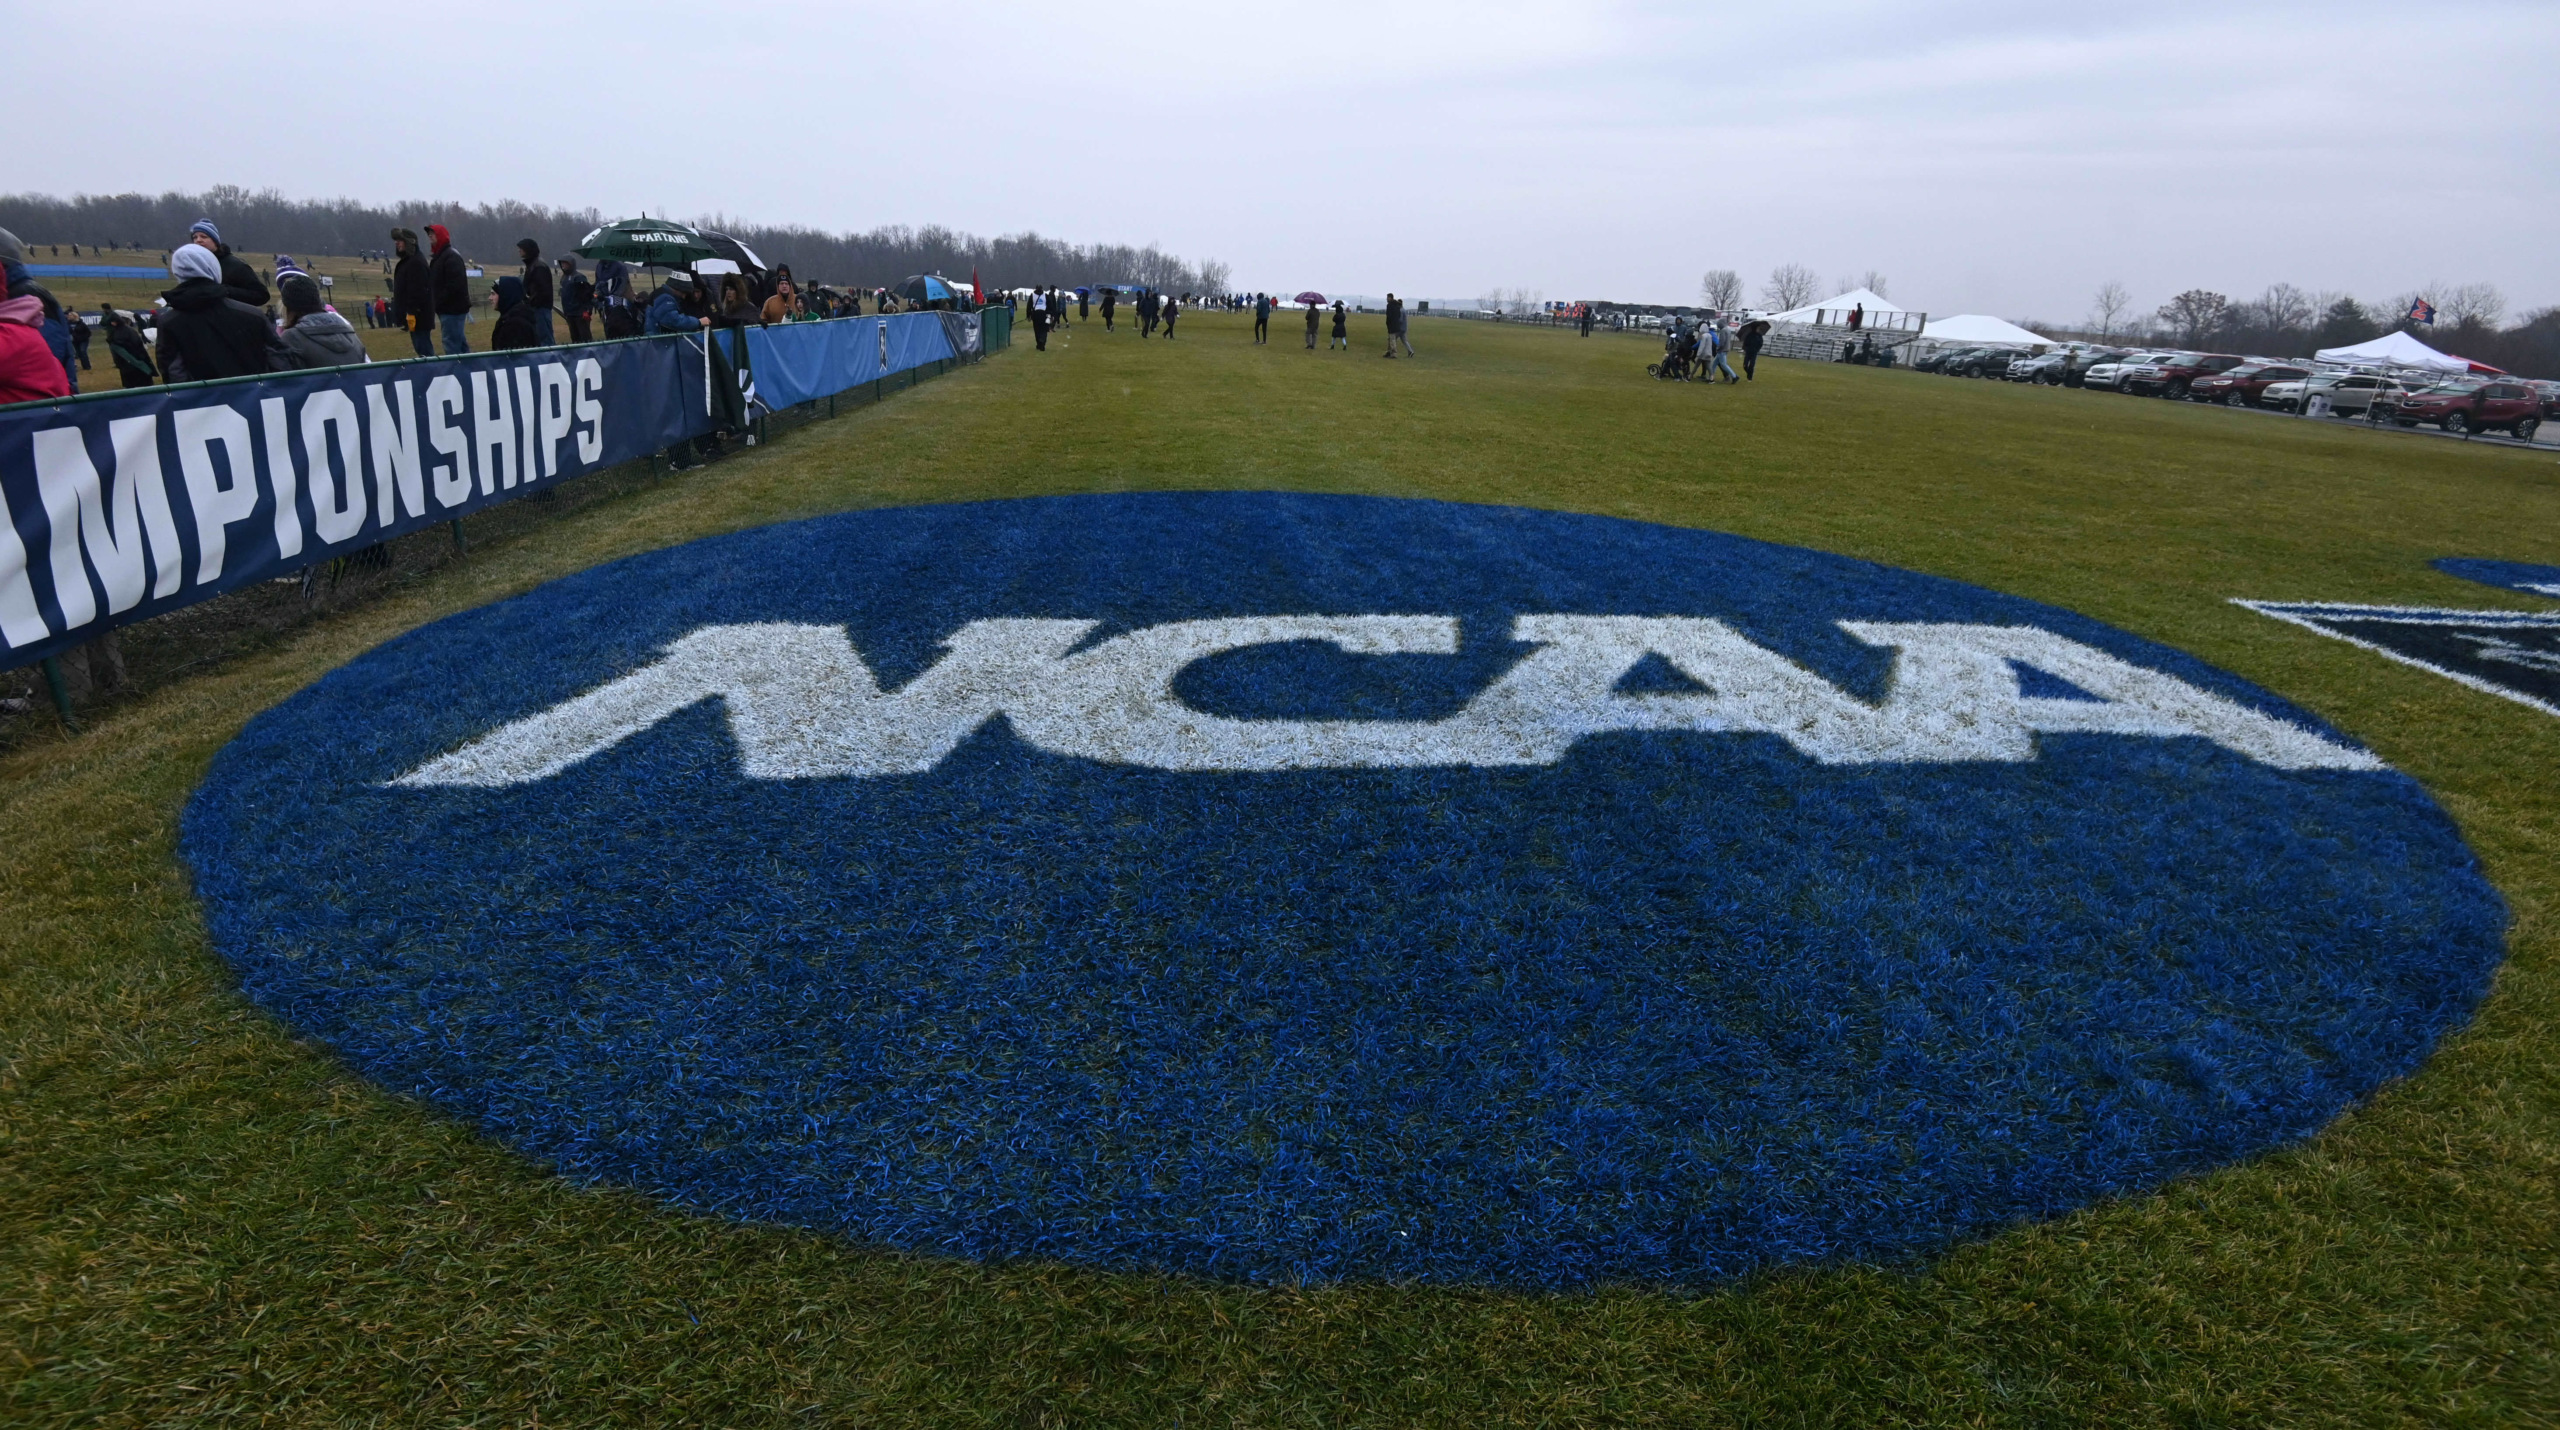 Report: NCAA Likely to Give DI 2020 Fall Athletes Extra Year